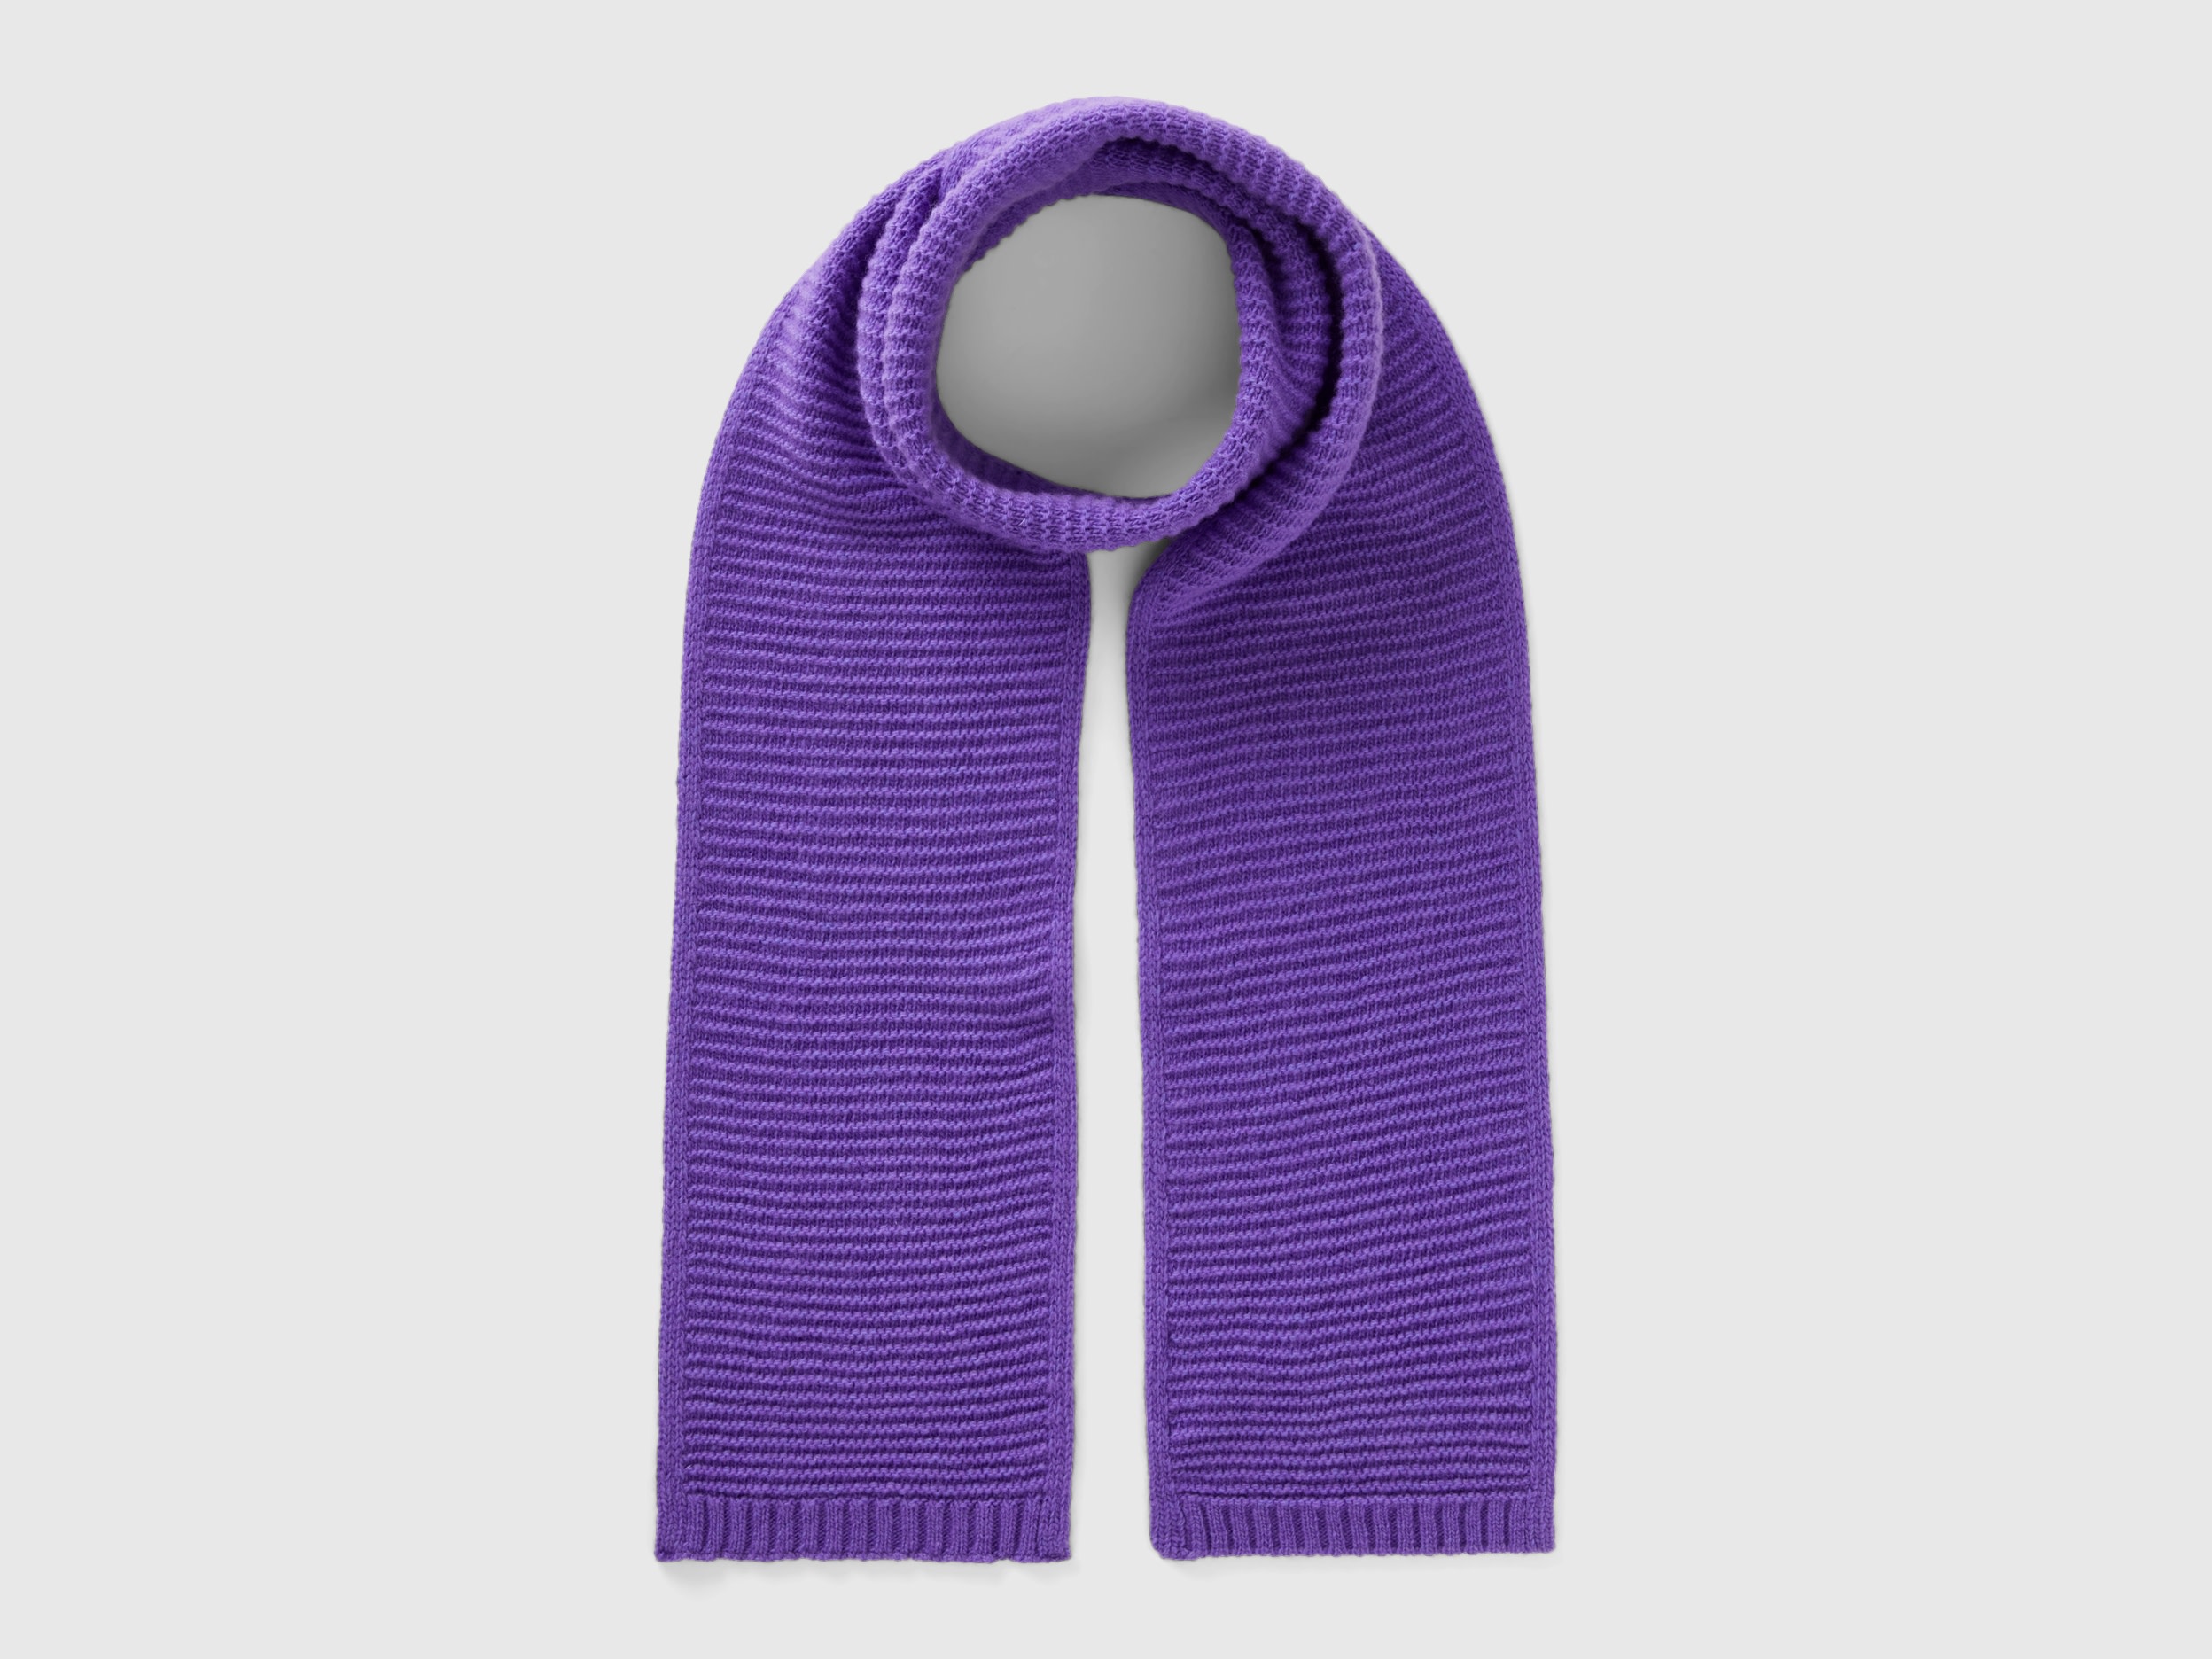 Benetton, Knit Scarf In Stretch Wool Blend, size 4-6, Violet, Kids